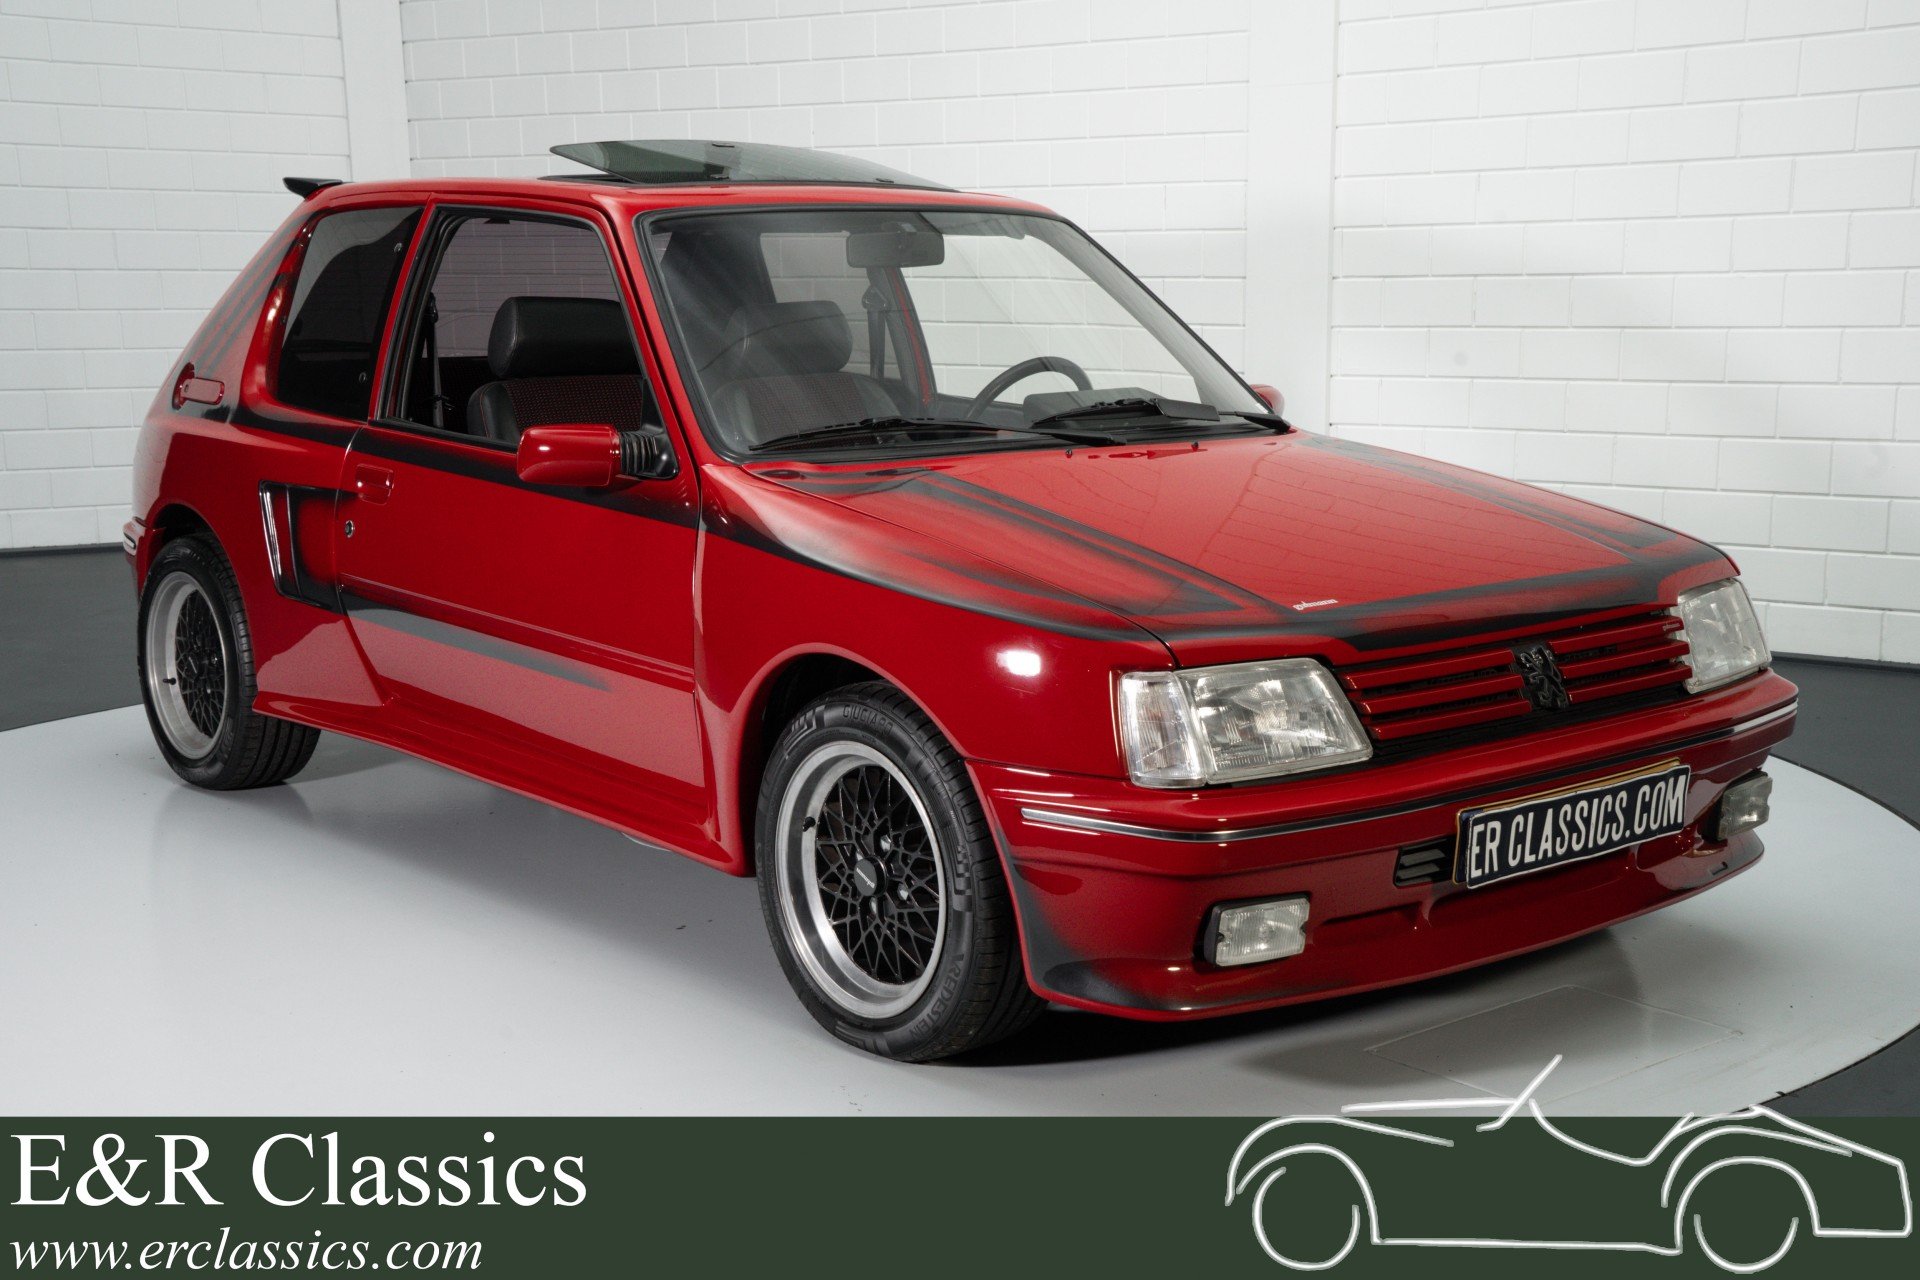 Peugeot 205 GTi for sale at ERclassics